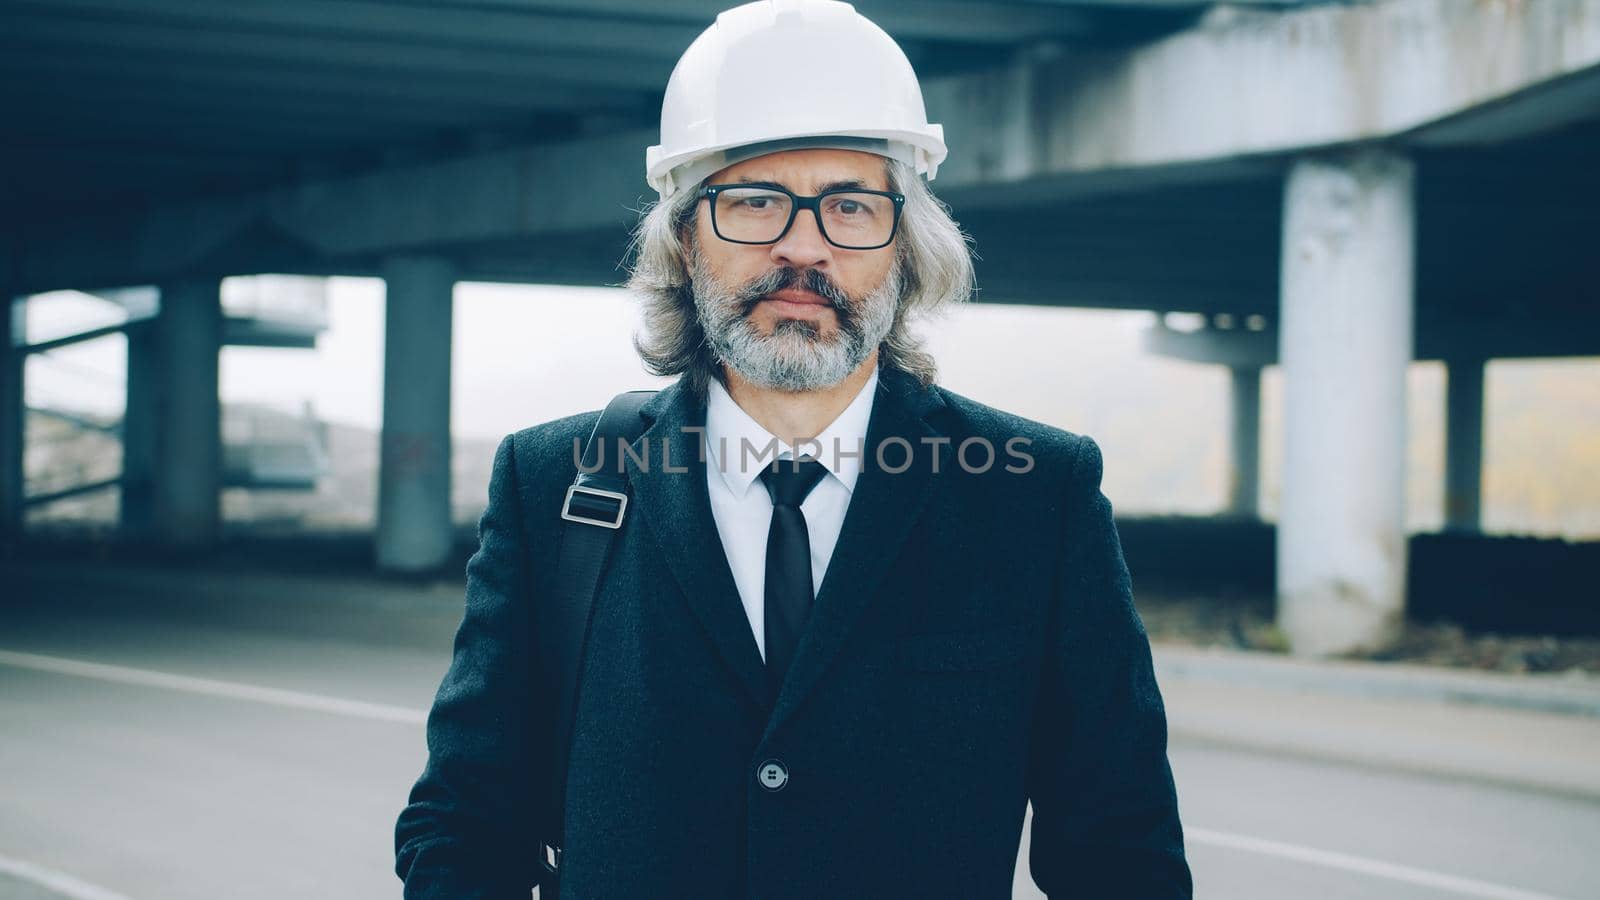 Portrait of respectful businessman standing in industrial zone outdoors wearing safety helmet and stylish suit and looking at camera with serious face